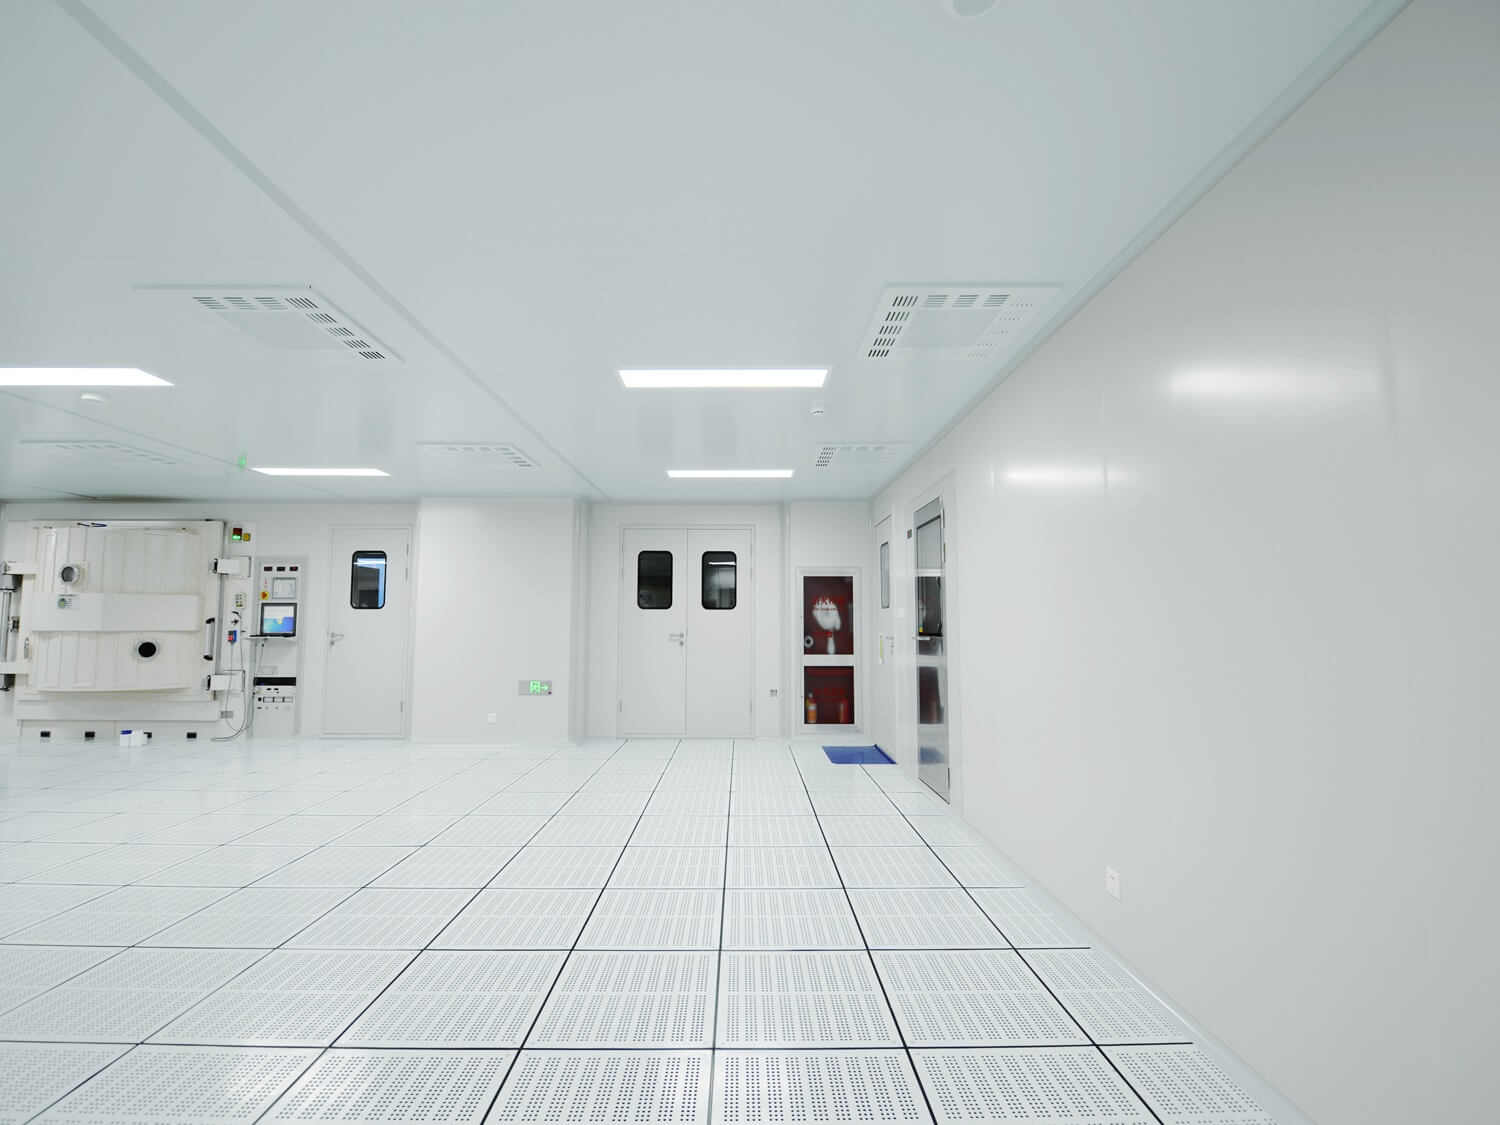 WHAT MAJORS ARE INVOLVED IN CLEAN ROOM CONSTRUCTION?